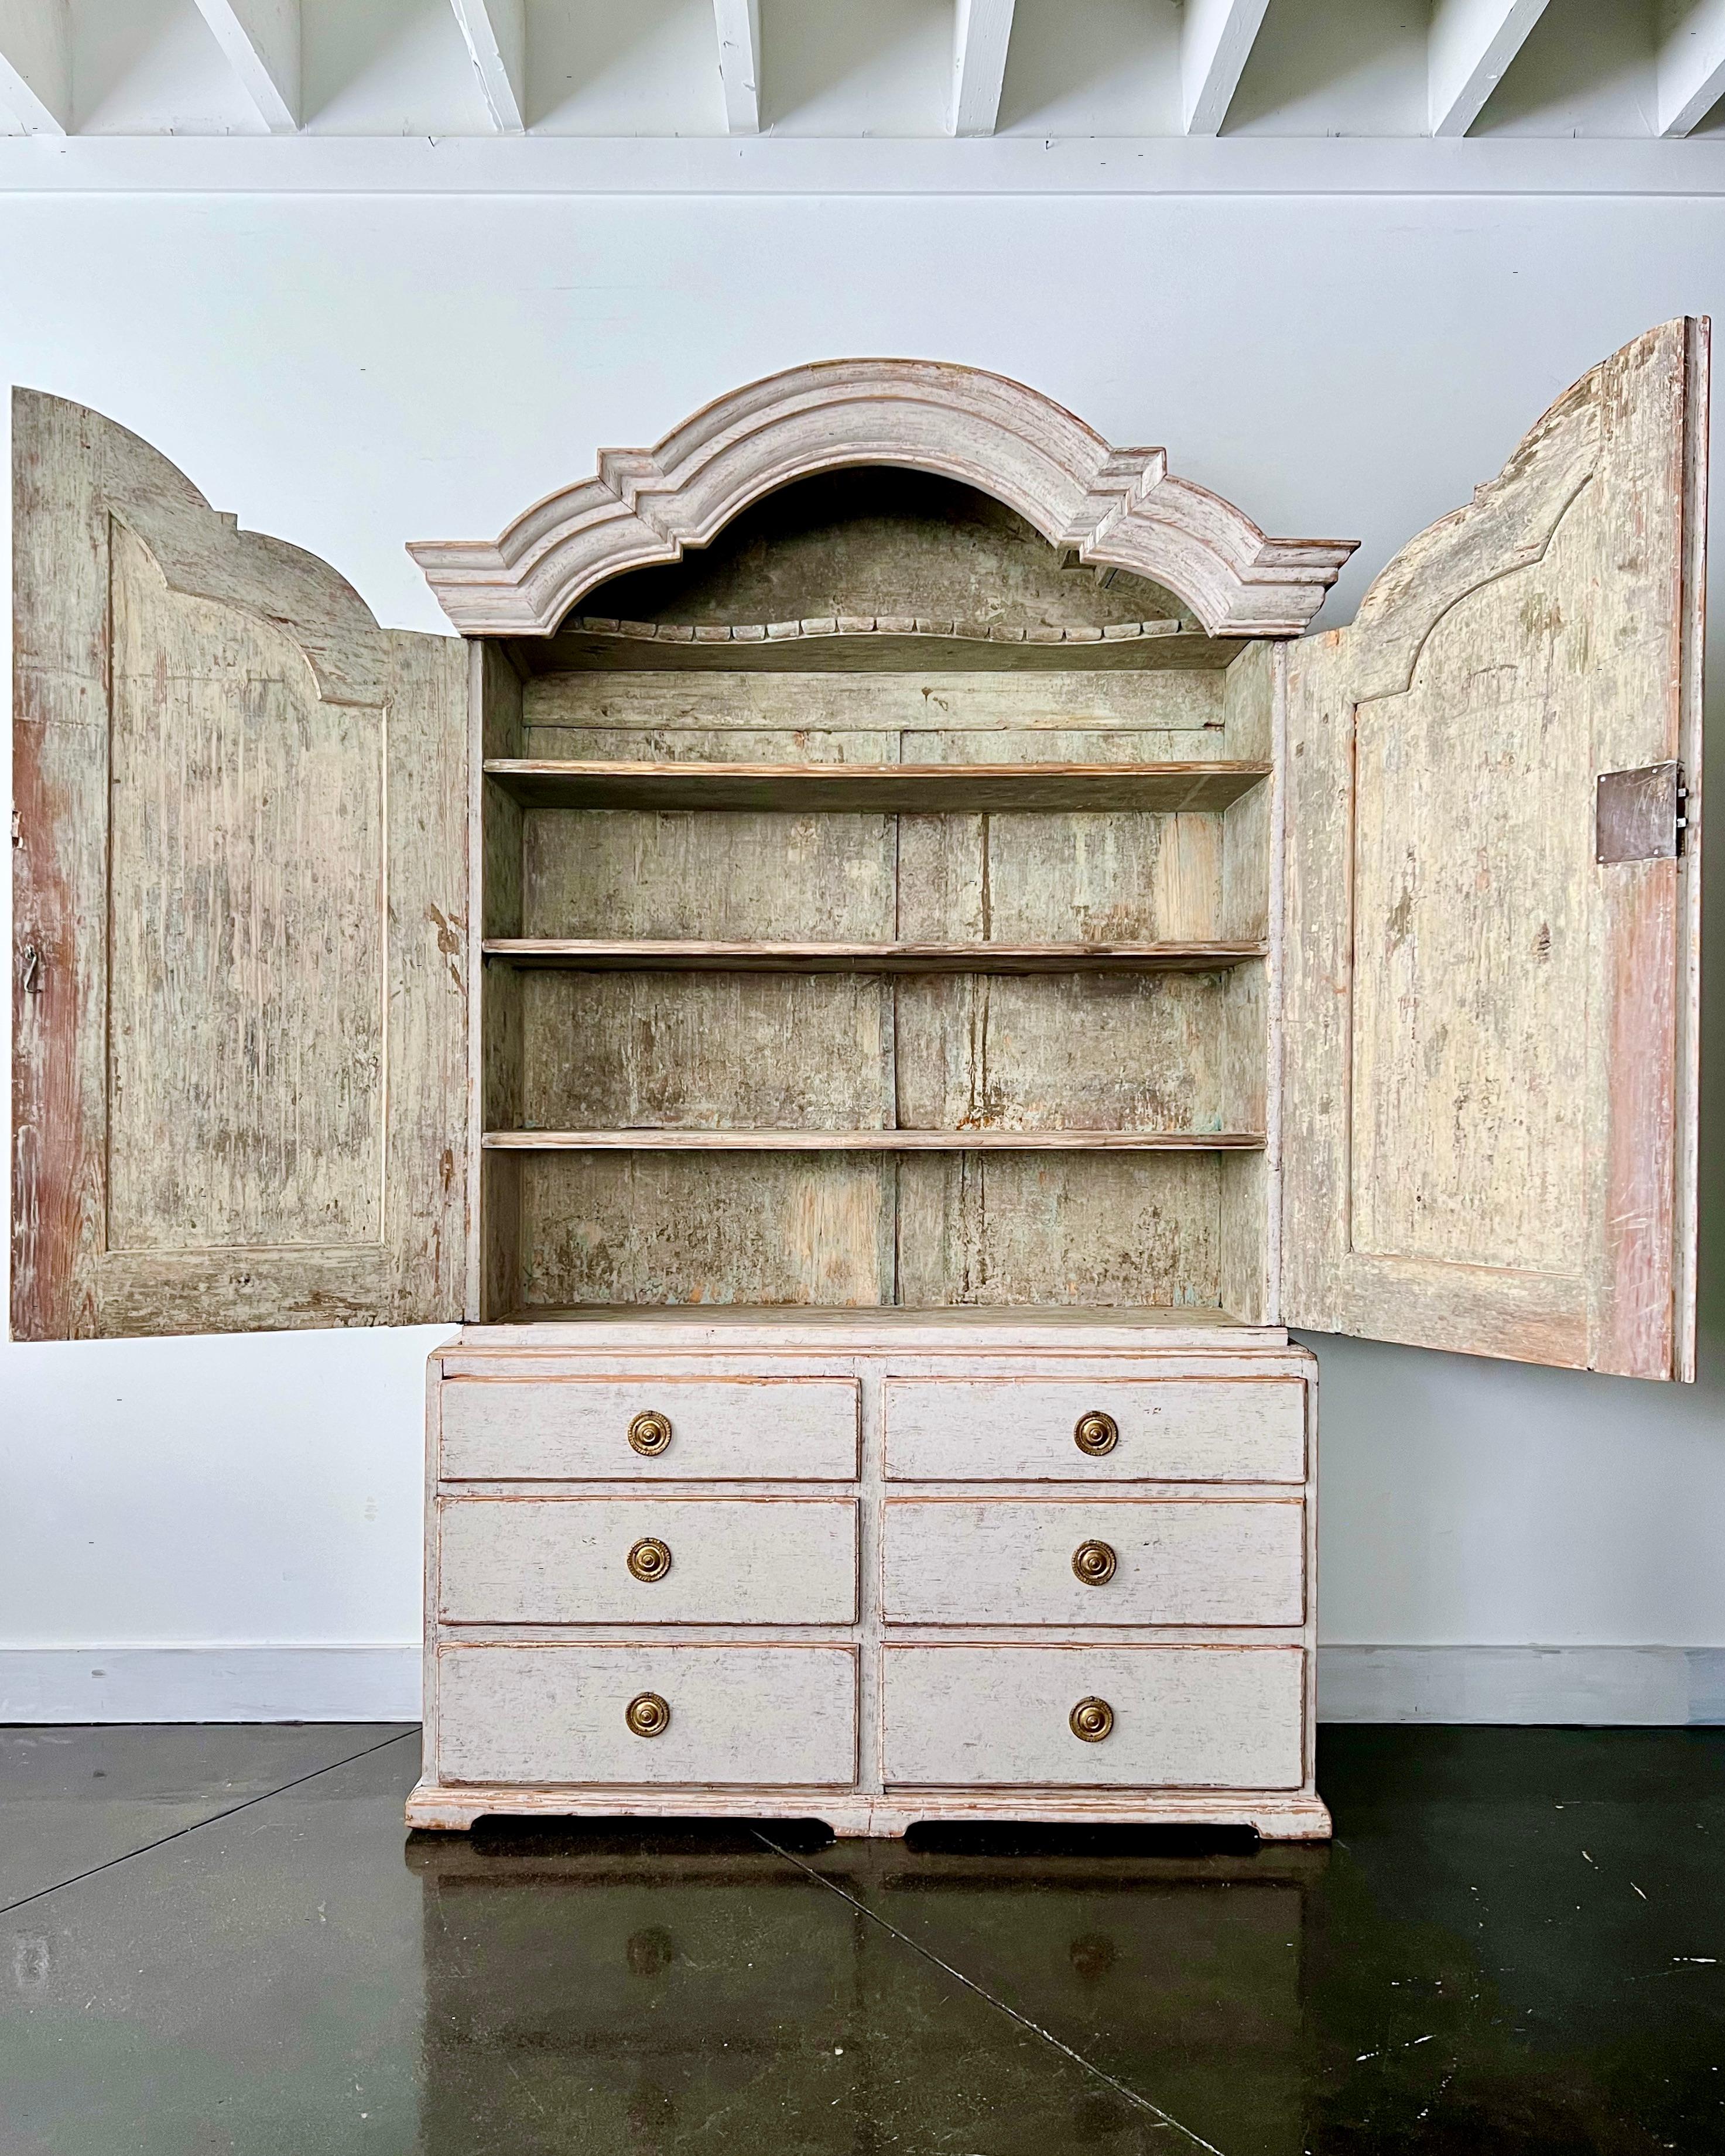 18th century Swedish Cabinet from period rococo ca 1760 Stockholm.
Original hardwares - please see in photo of very original key.
Upper cabinet with two large doors, resting on six stack of drawers.
Stockholm, Sweden ca 1760 